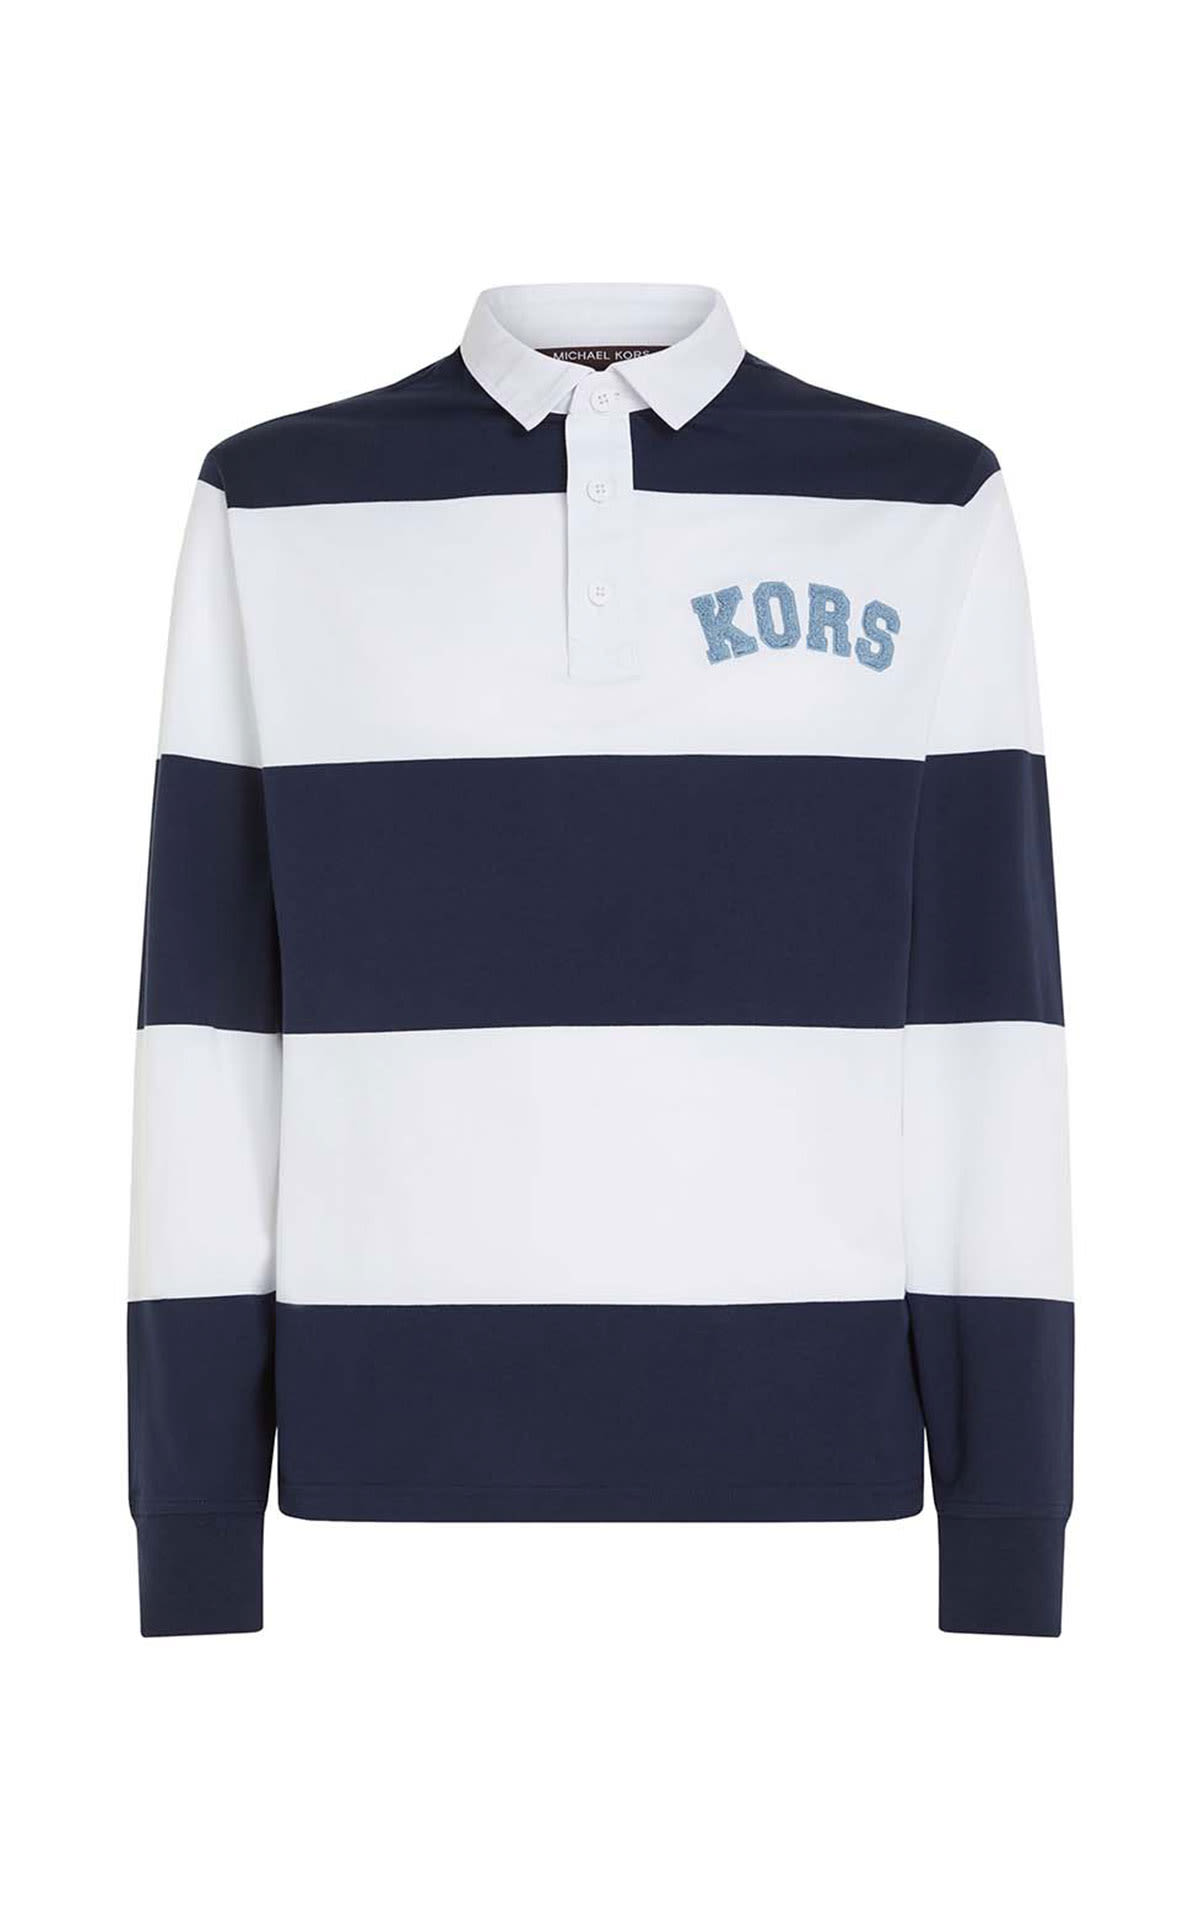 White and navy striped polo shirt Michael Kors